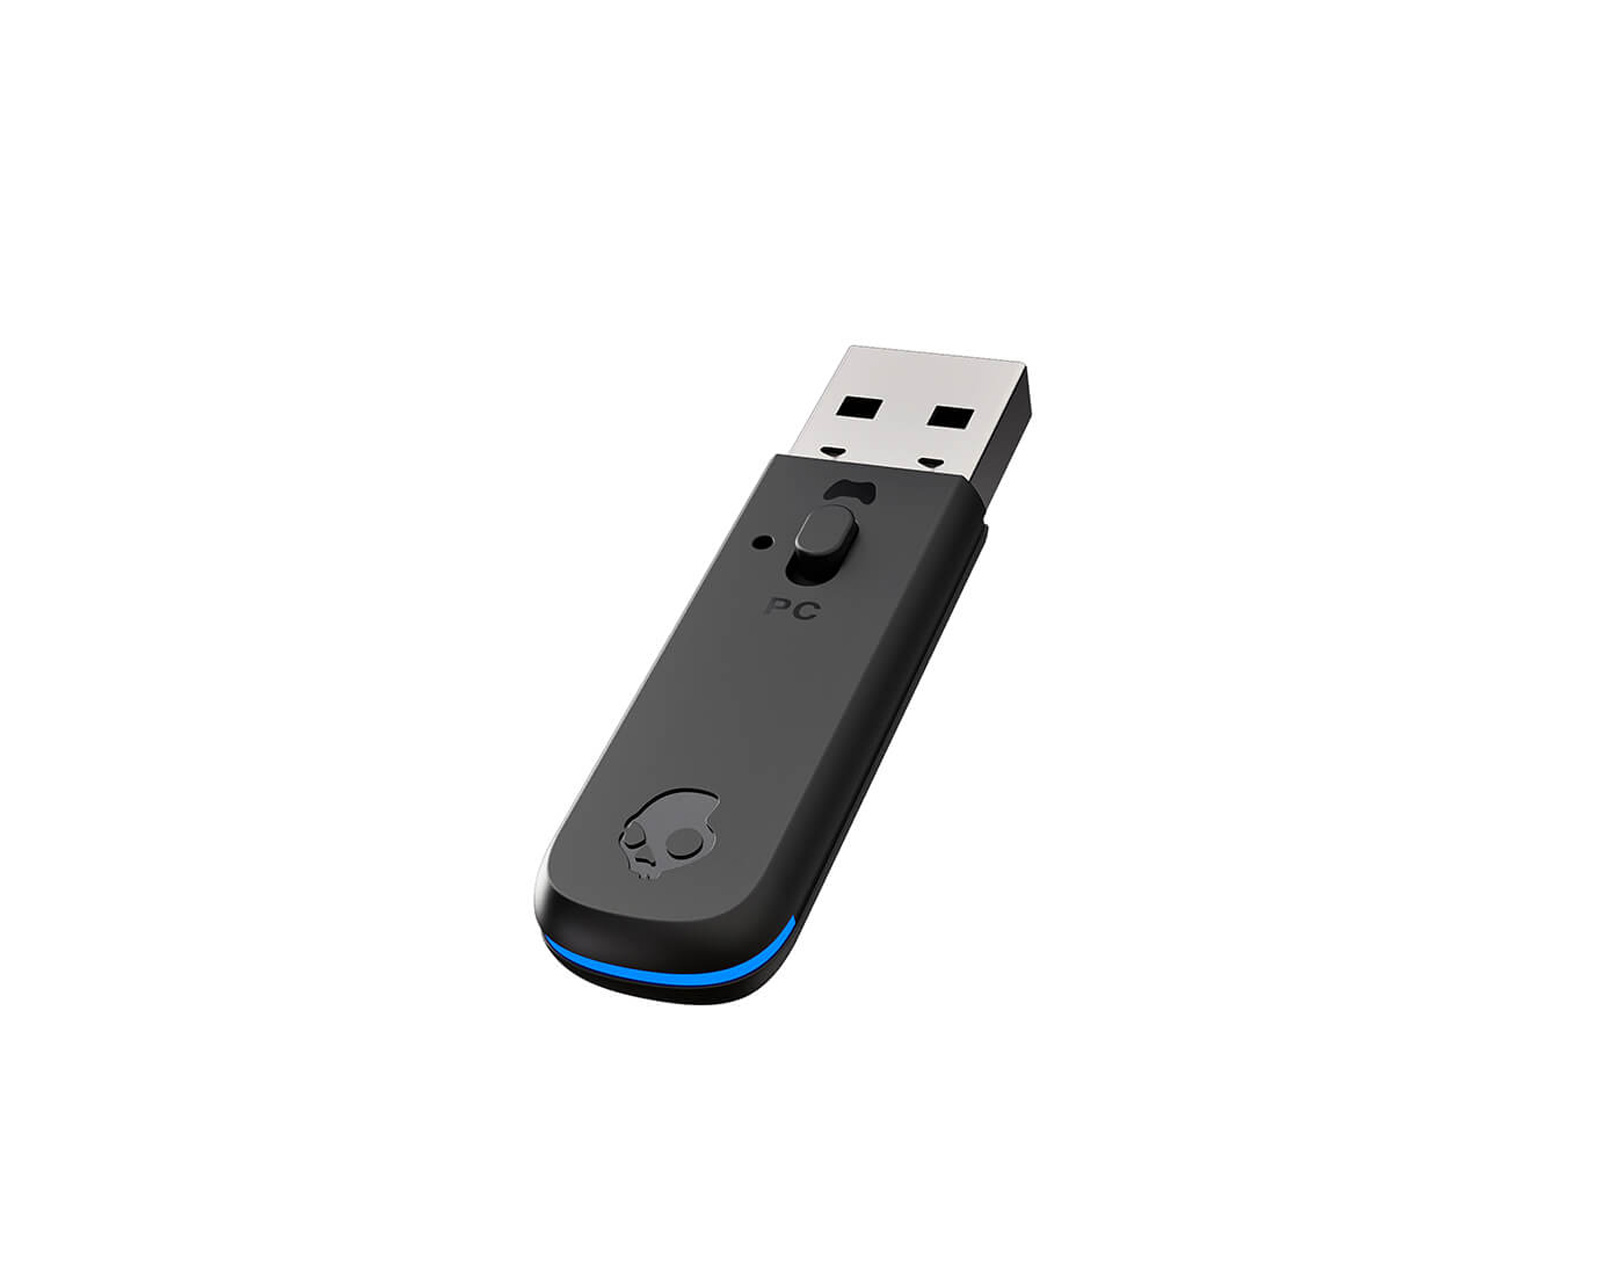 Wireless USB Bluetooth 2.1 Transmitter Dongle For PS5 Computer Headset